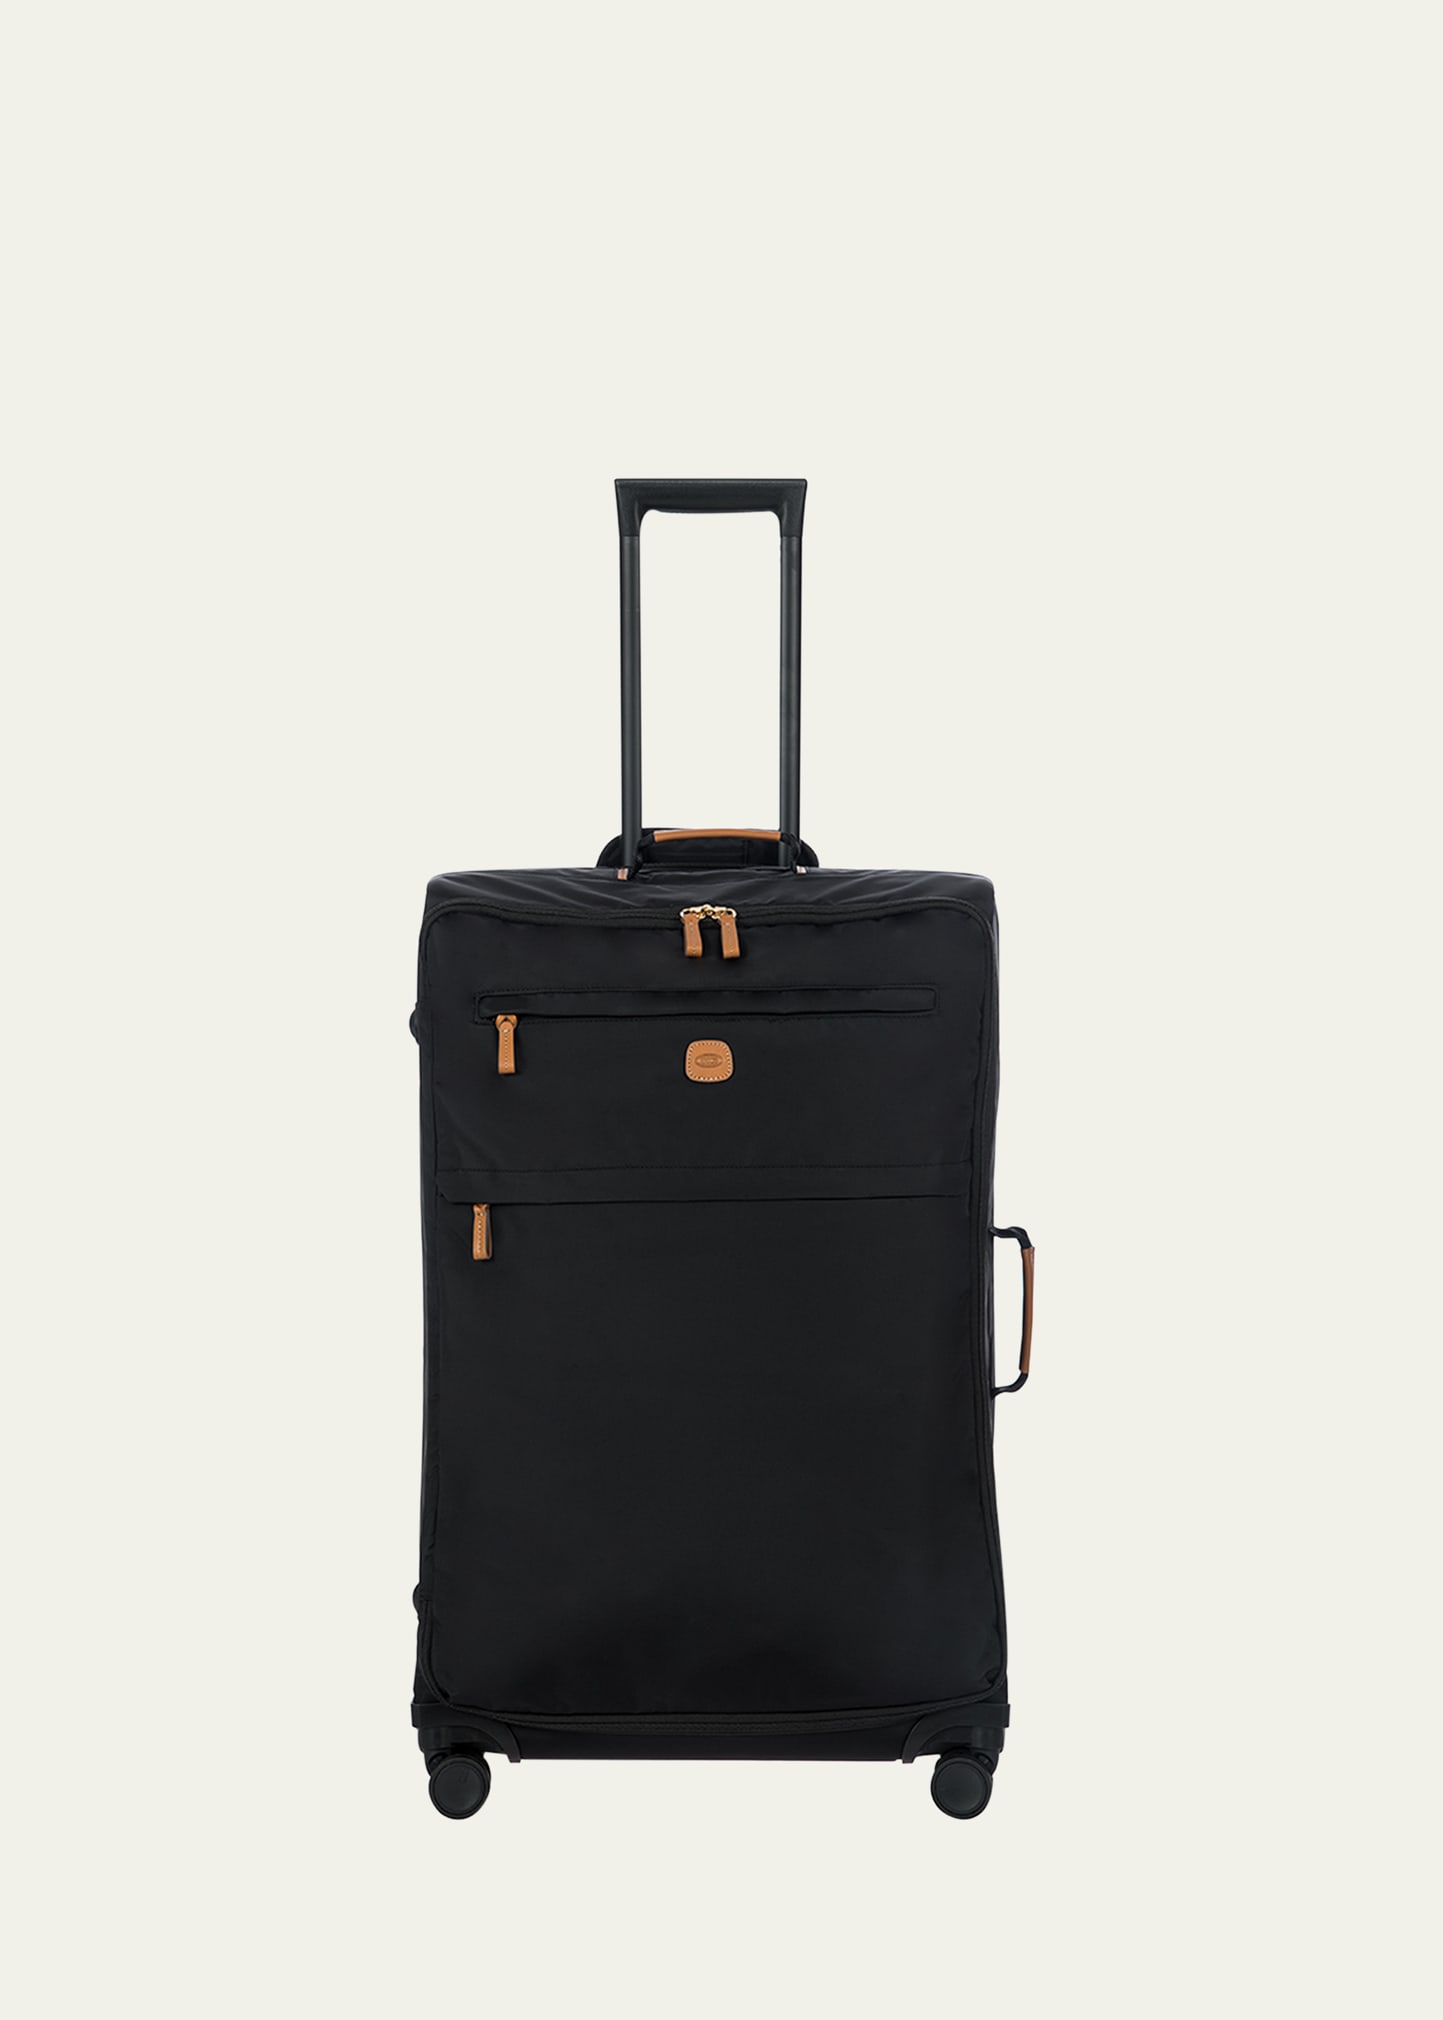 X-Travel 30" Spinner Luggage